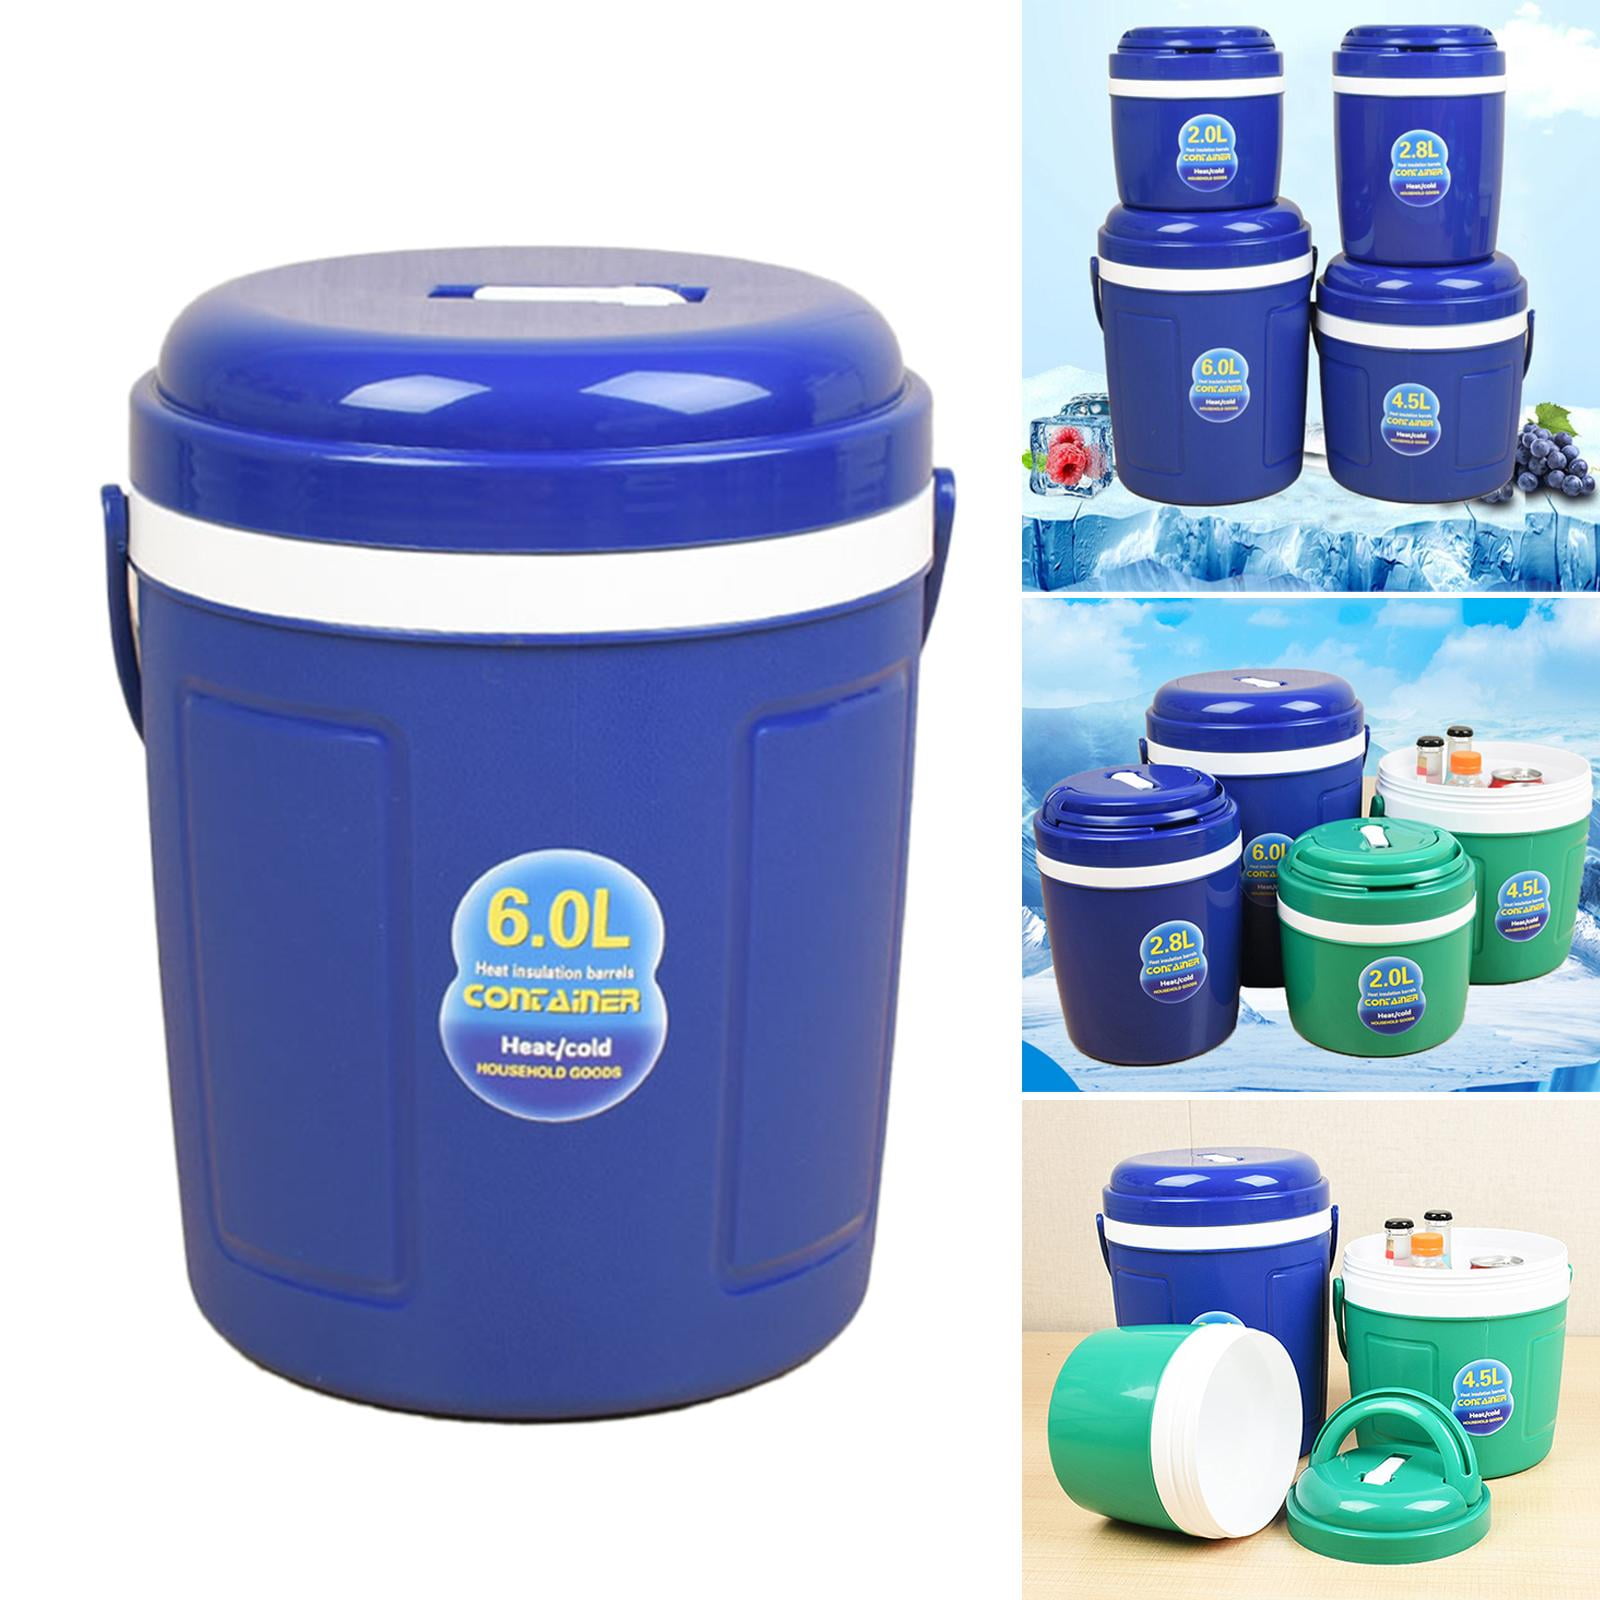 Superb Quality Heat Resistant Containers With Luring Discounts